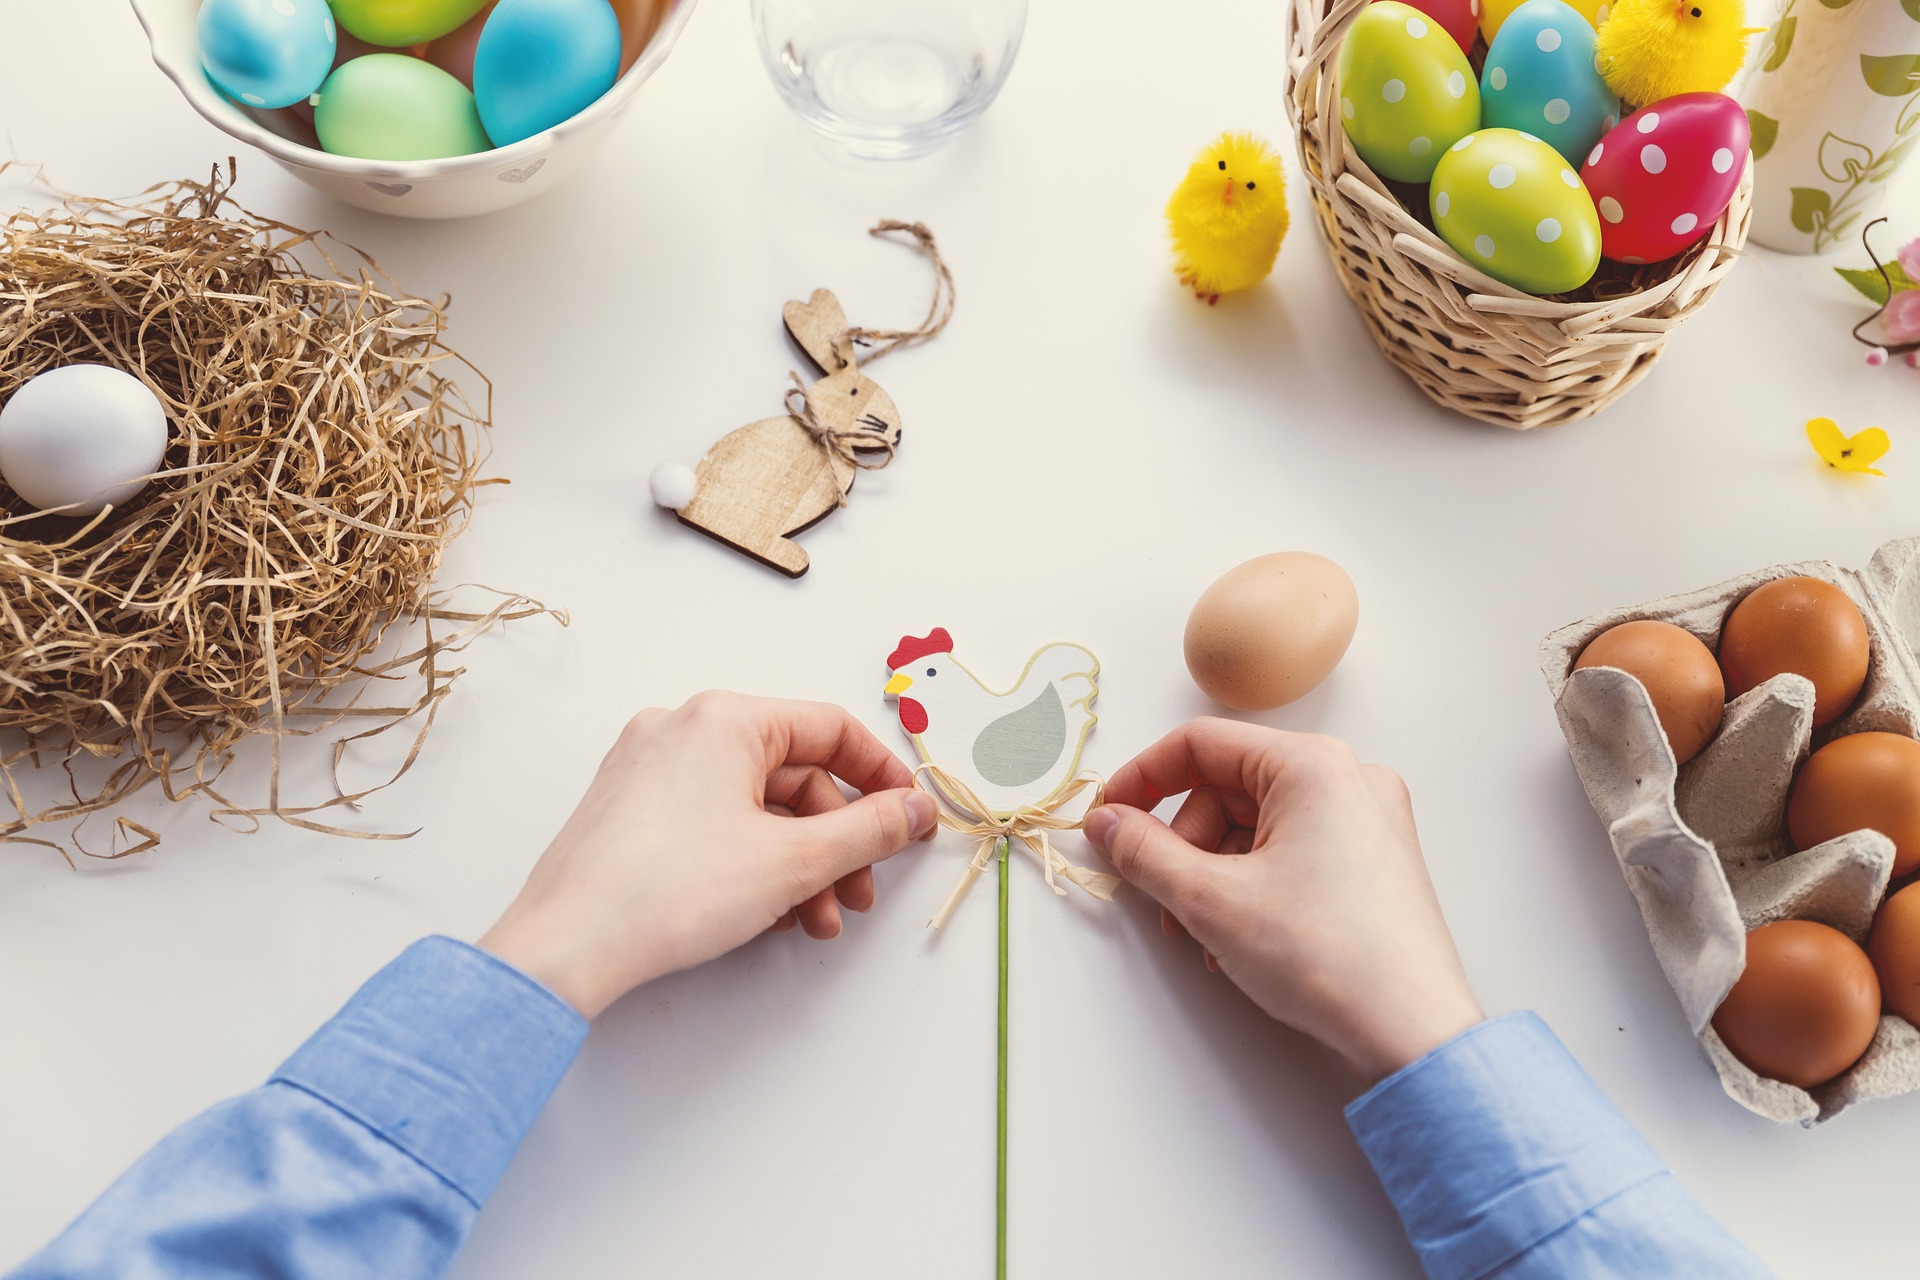 Course Image for 8040C2228 Family Fun:: Easter Crafts (Workshop)